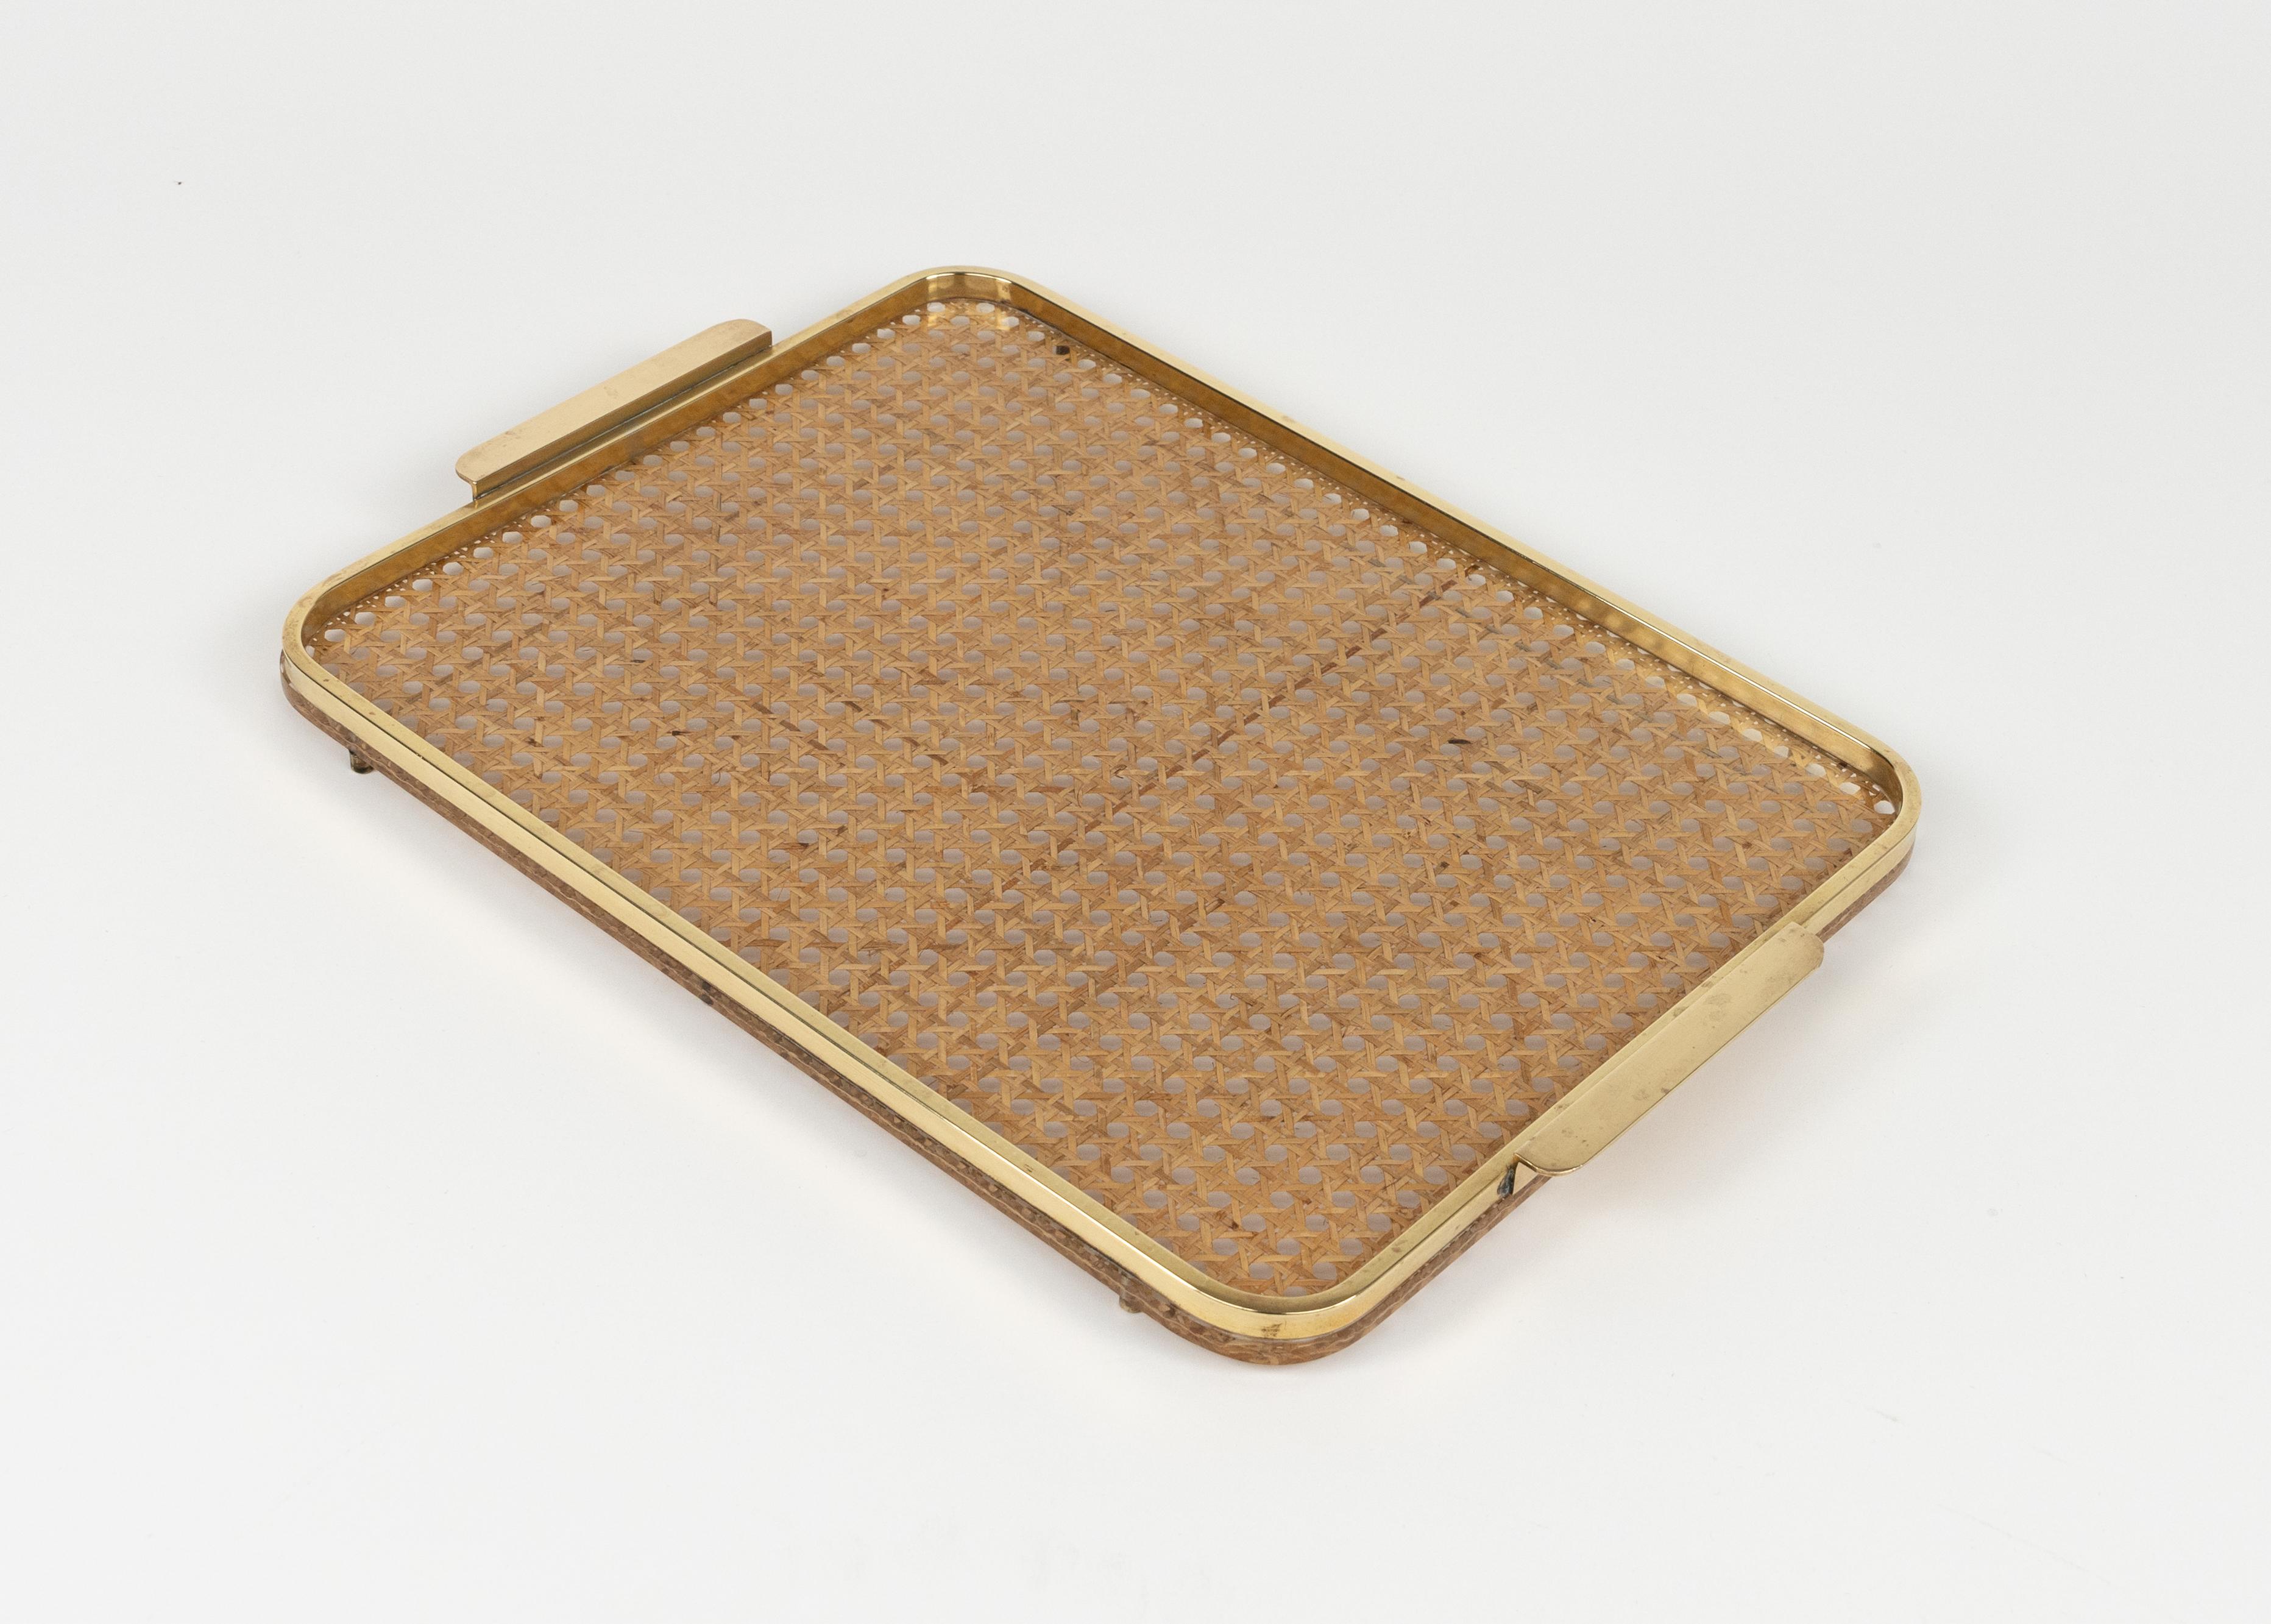 Metal Serving Tray in Lucite, Rattan and Brass Christian Dior Style, Italy, 1970s For Sale